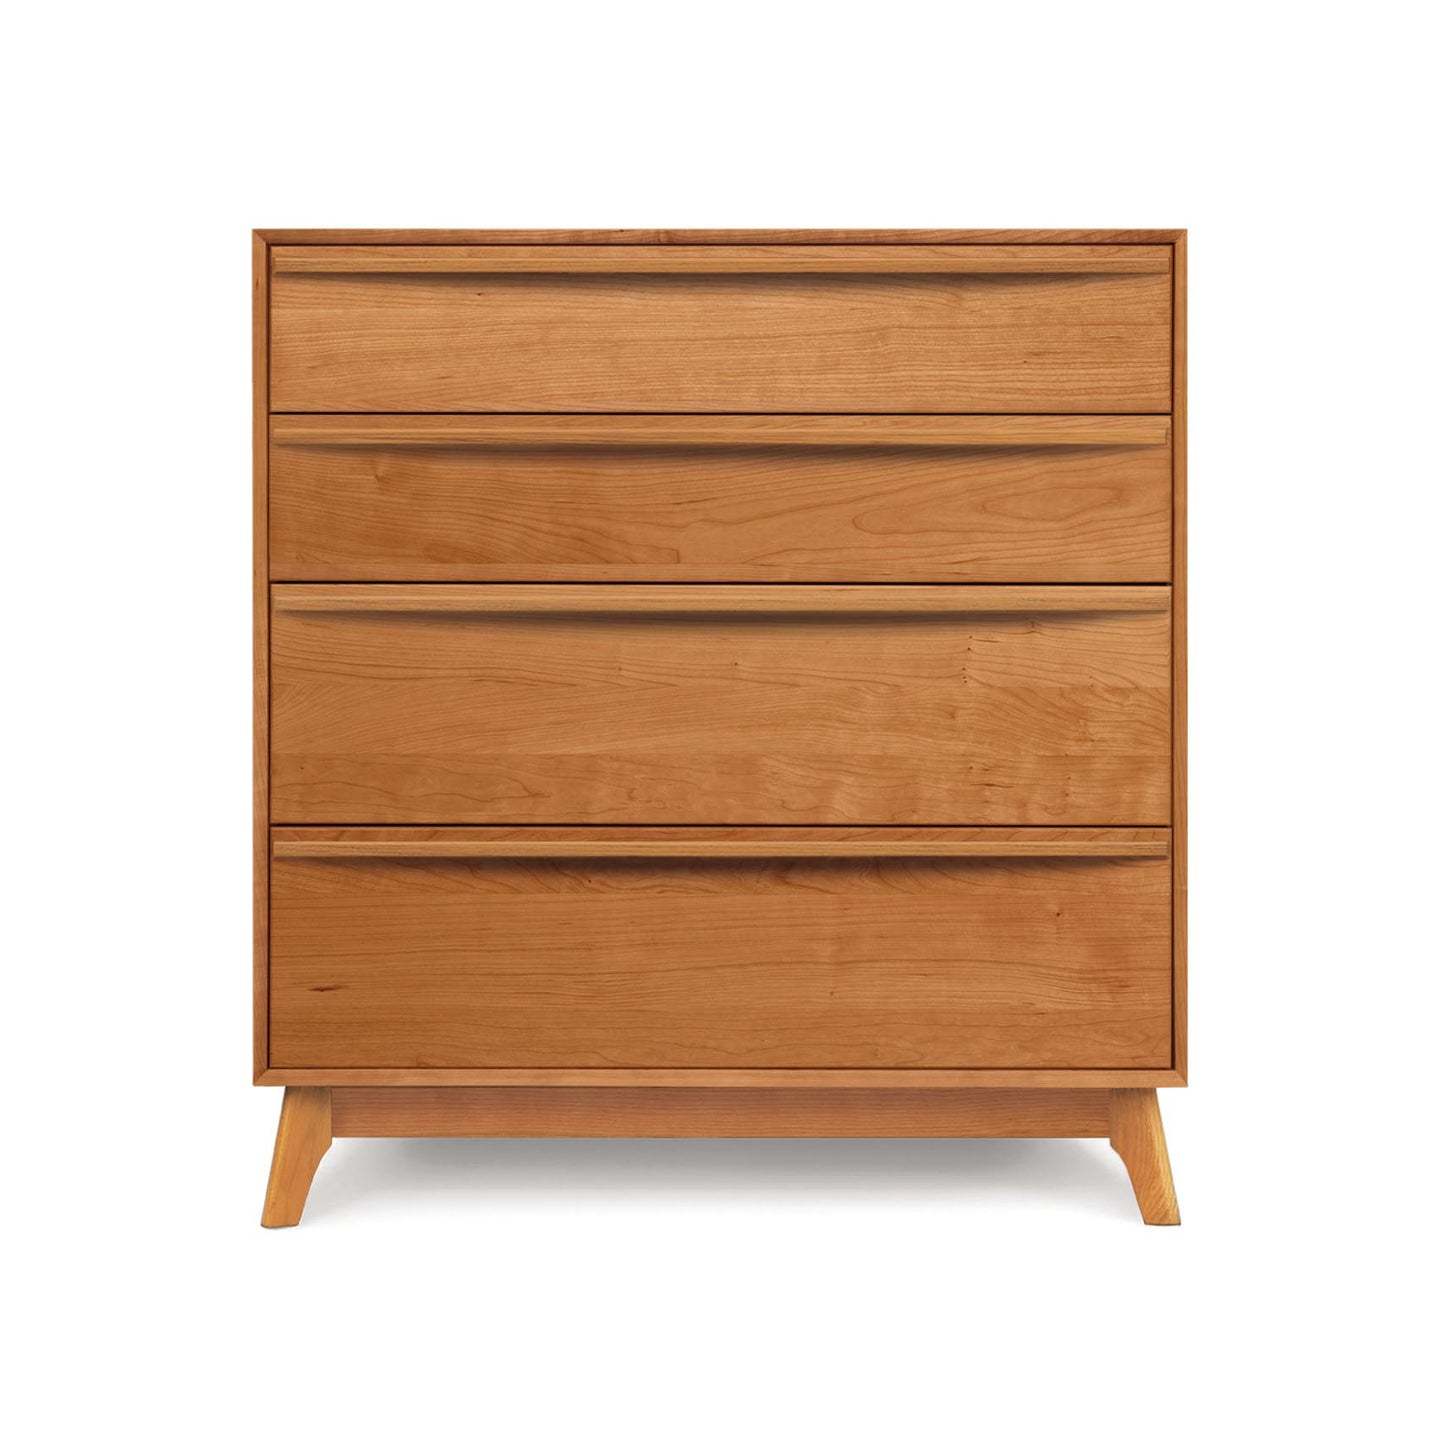 A handmade wooden Copeland Furniture Catalina 4-Drawer Chest on a white background.